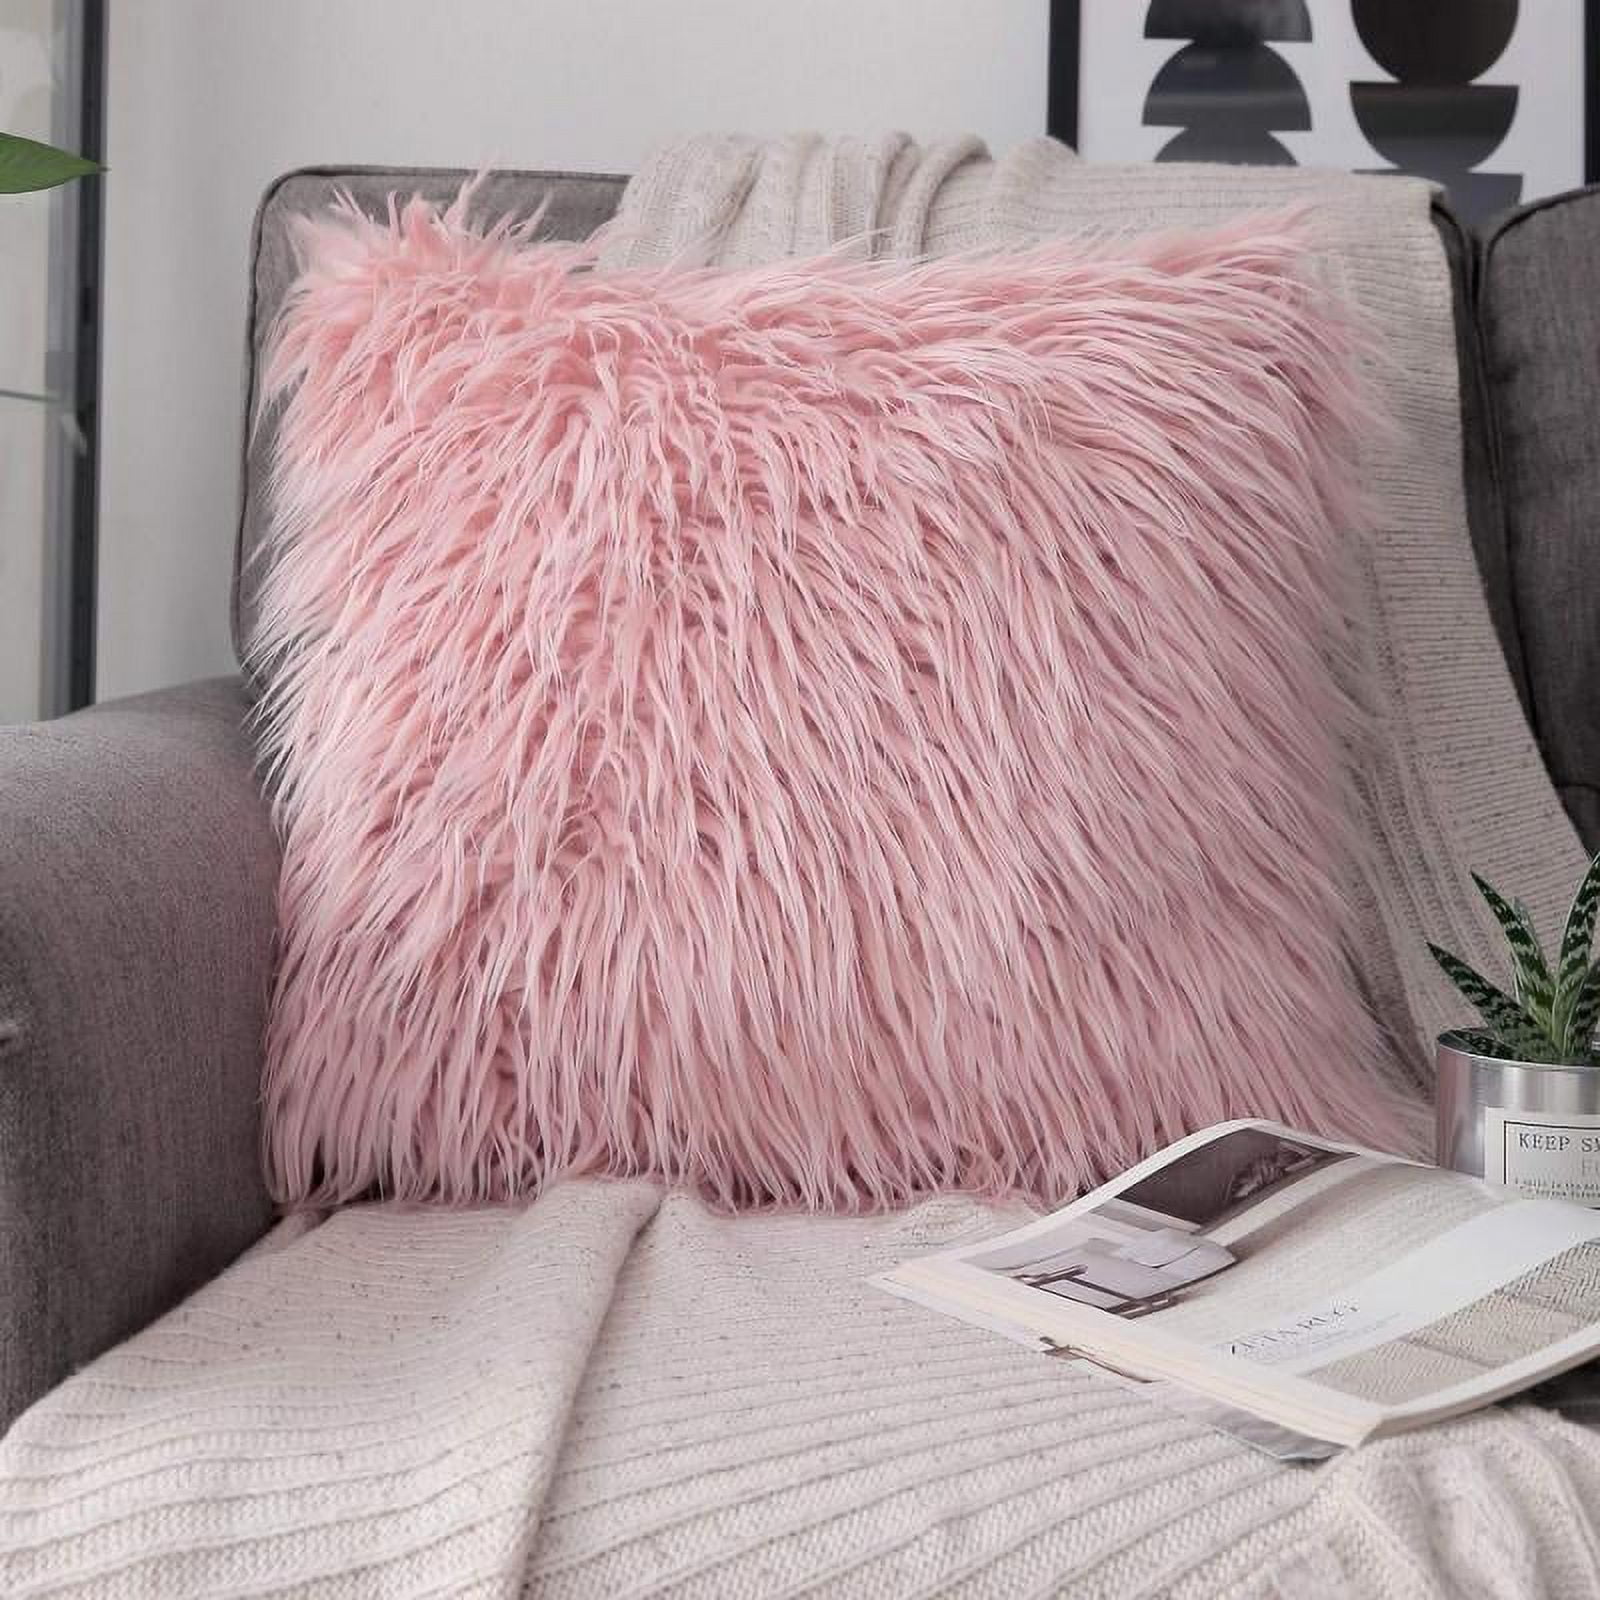 Pink Leopard Faux Fur Throw Pillows Pair 16 X 16 With Insert Included 